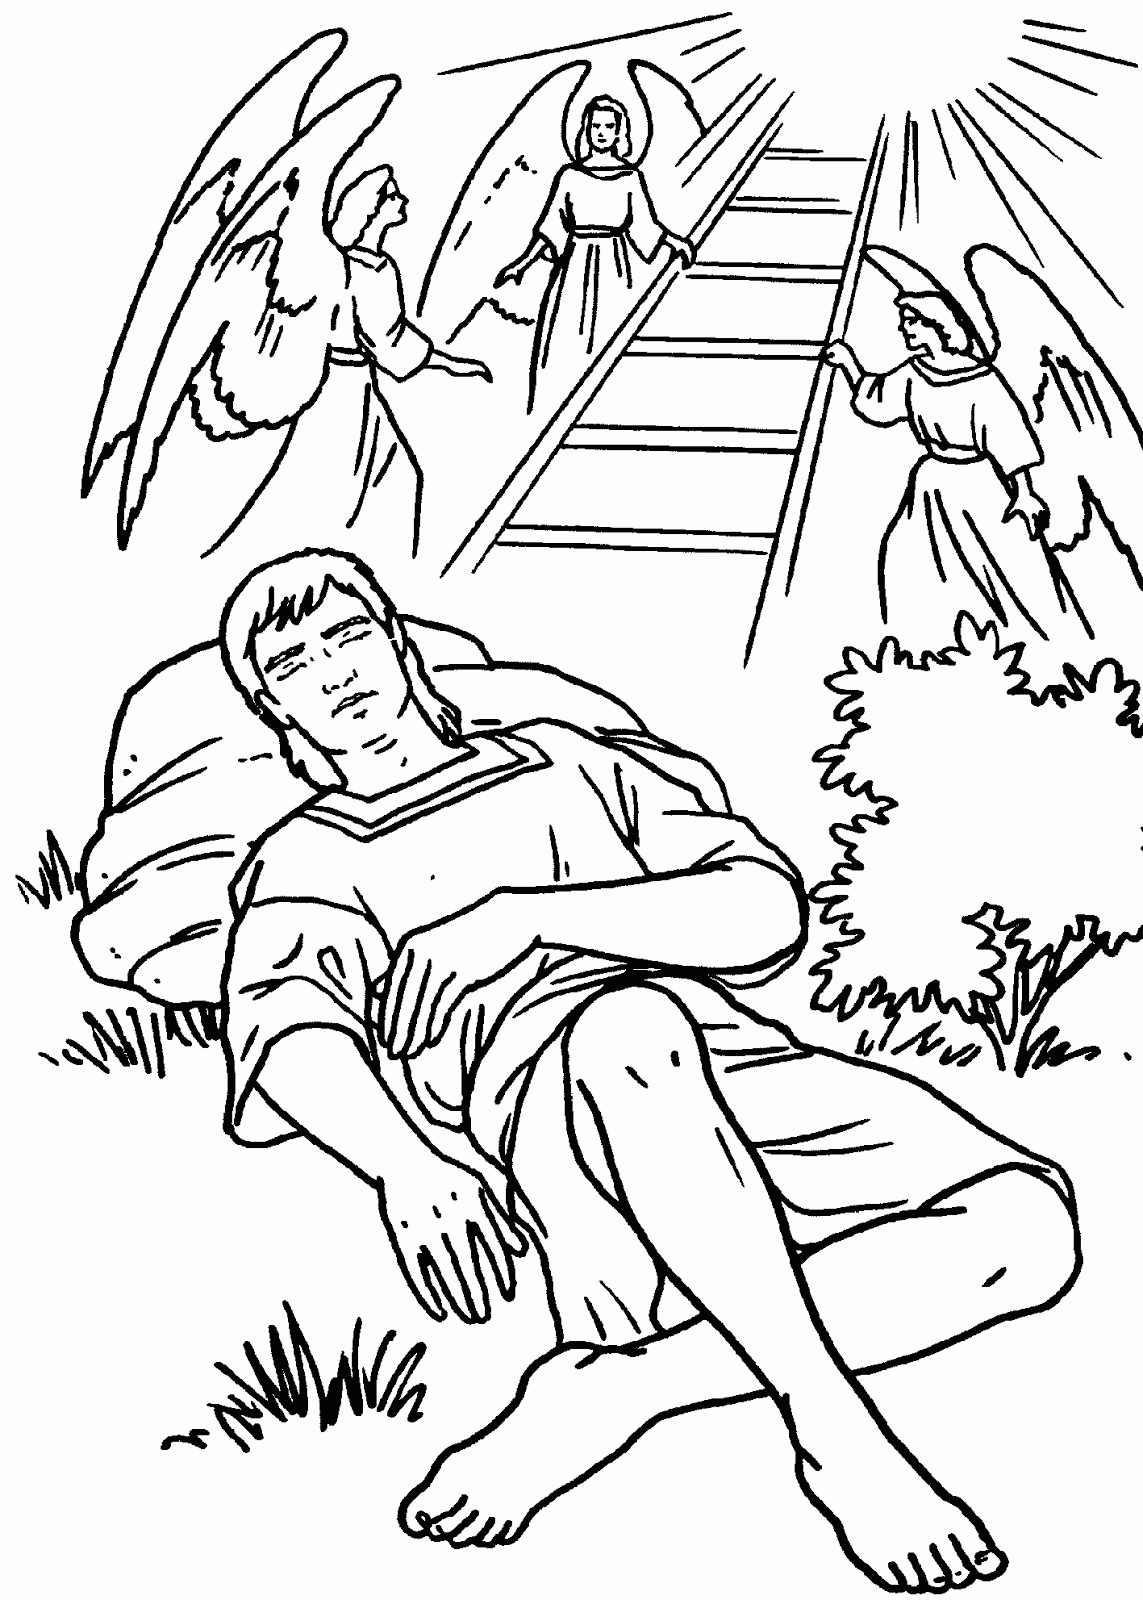 Jacob And Esau, Coloring Page free image